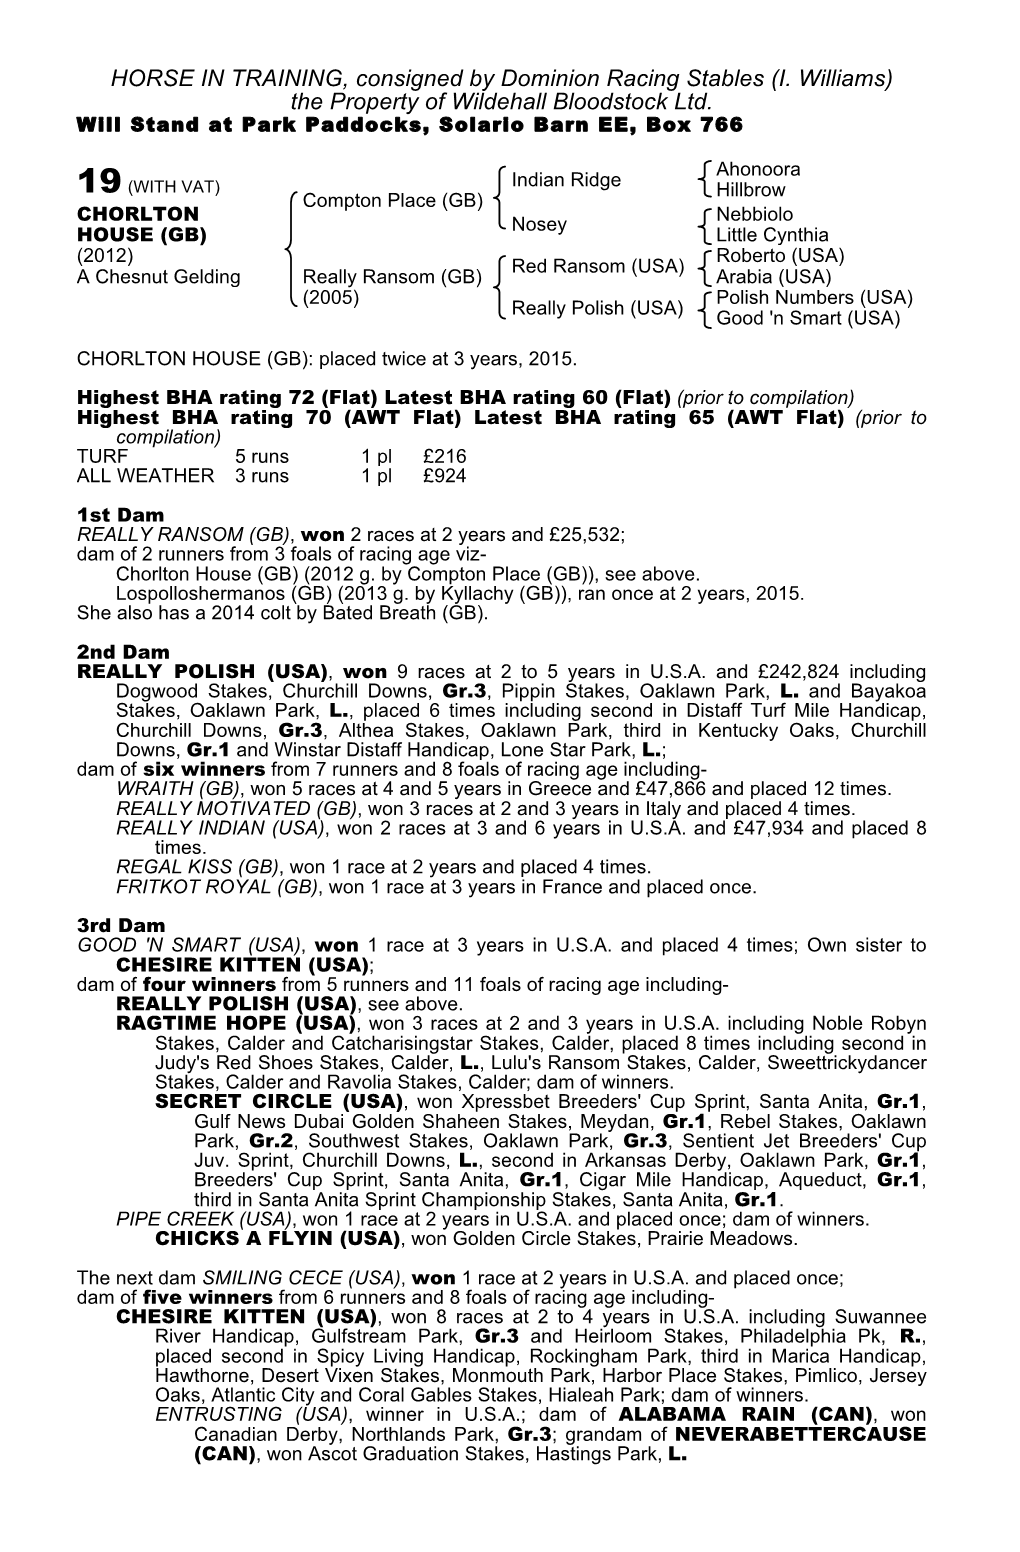 HORSE in TRAINING, Consigned by Dominion Racing Stables (I